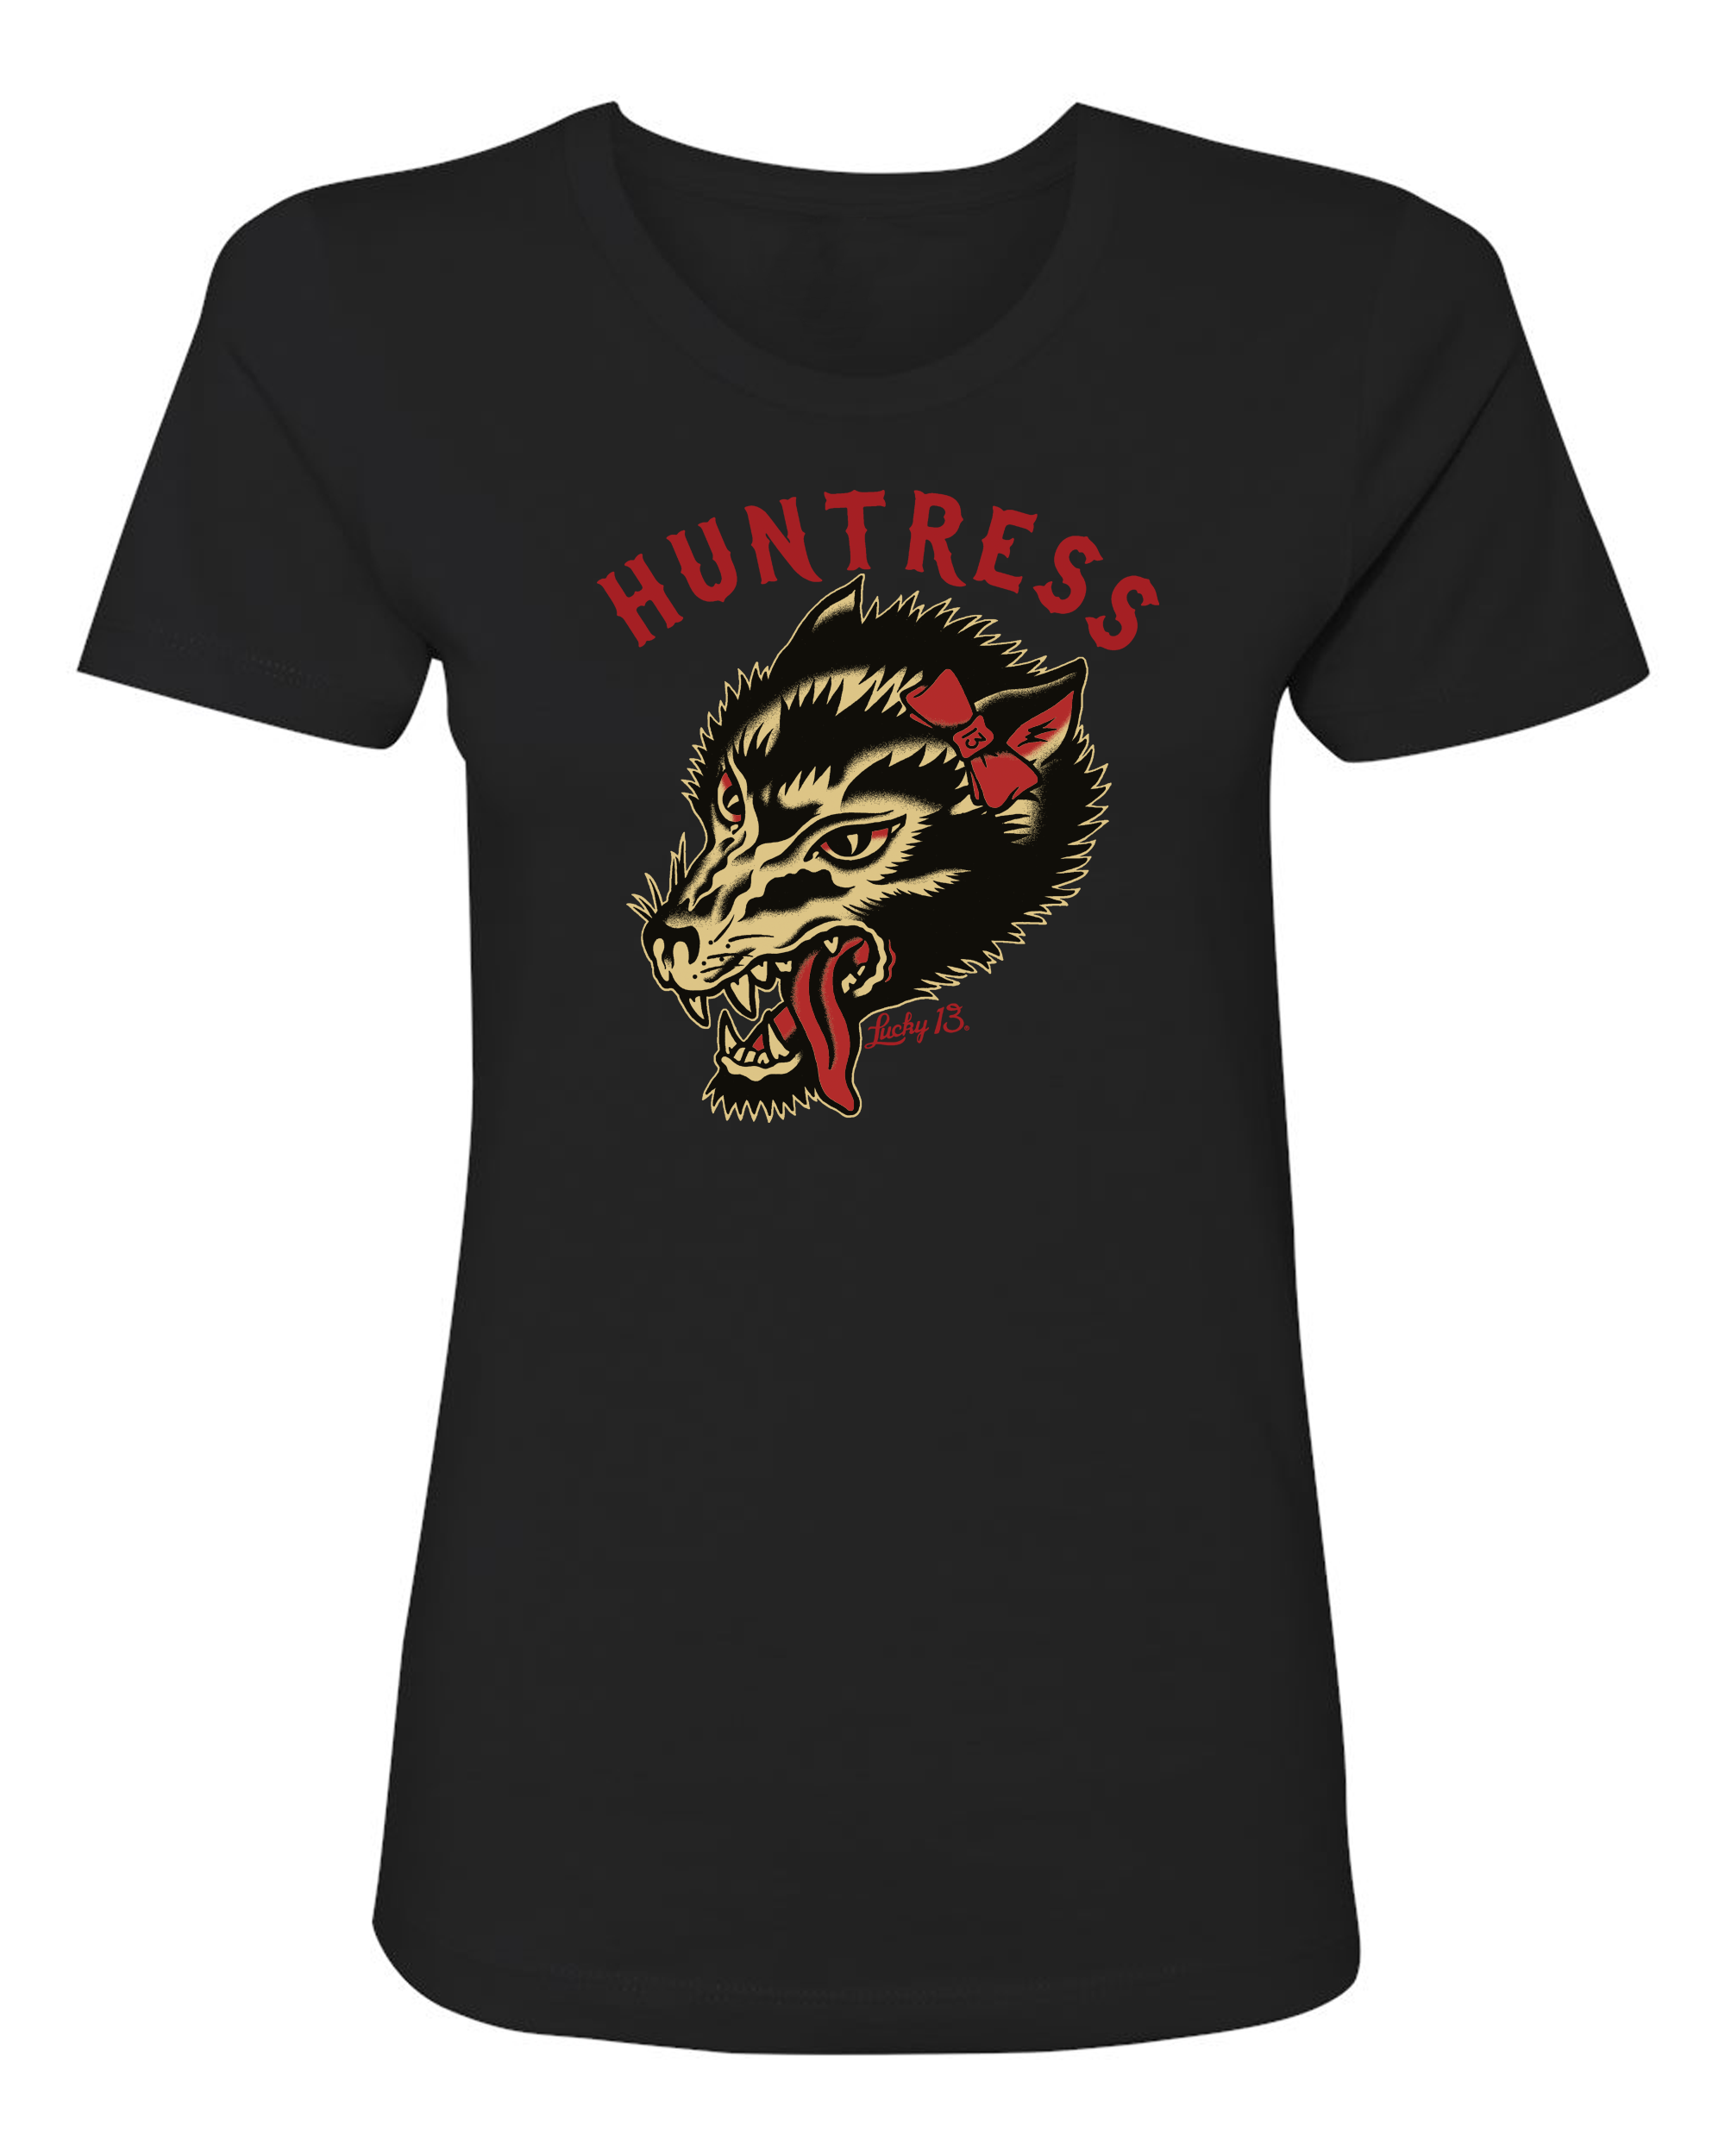 The HUNTRESS Women’s Crew Neck Tee - NOW AVAILABLE IN 3XL!